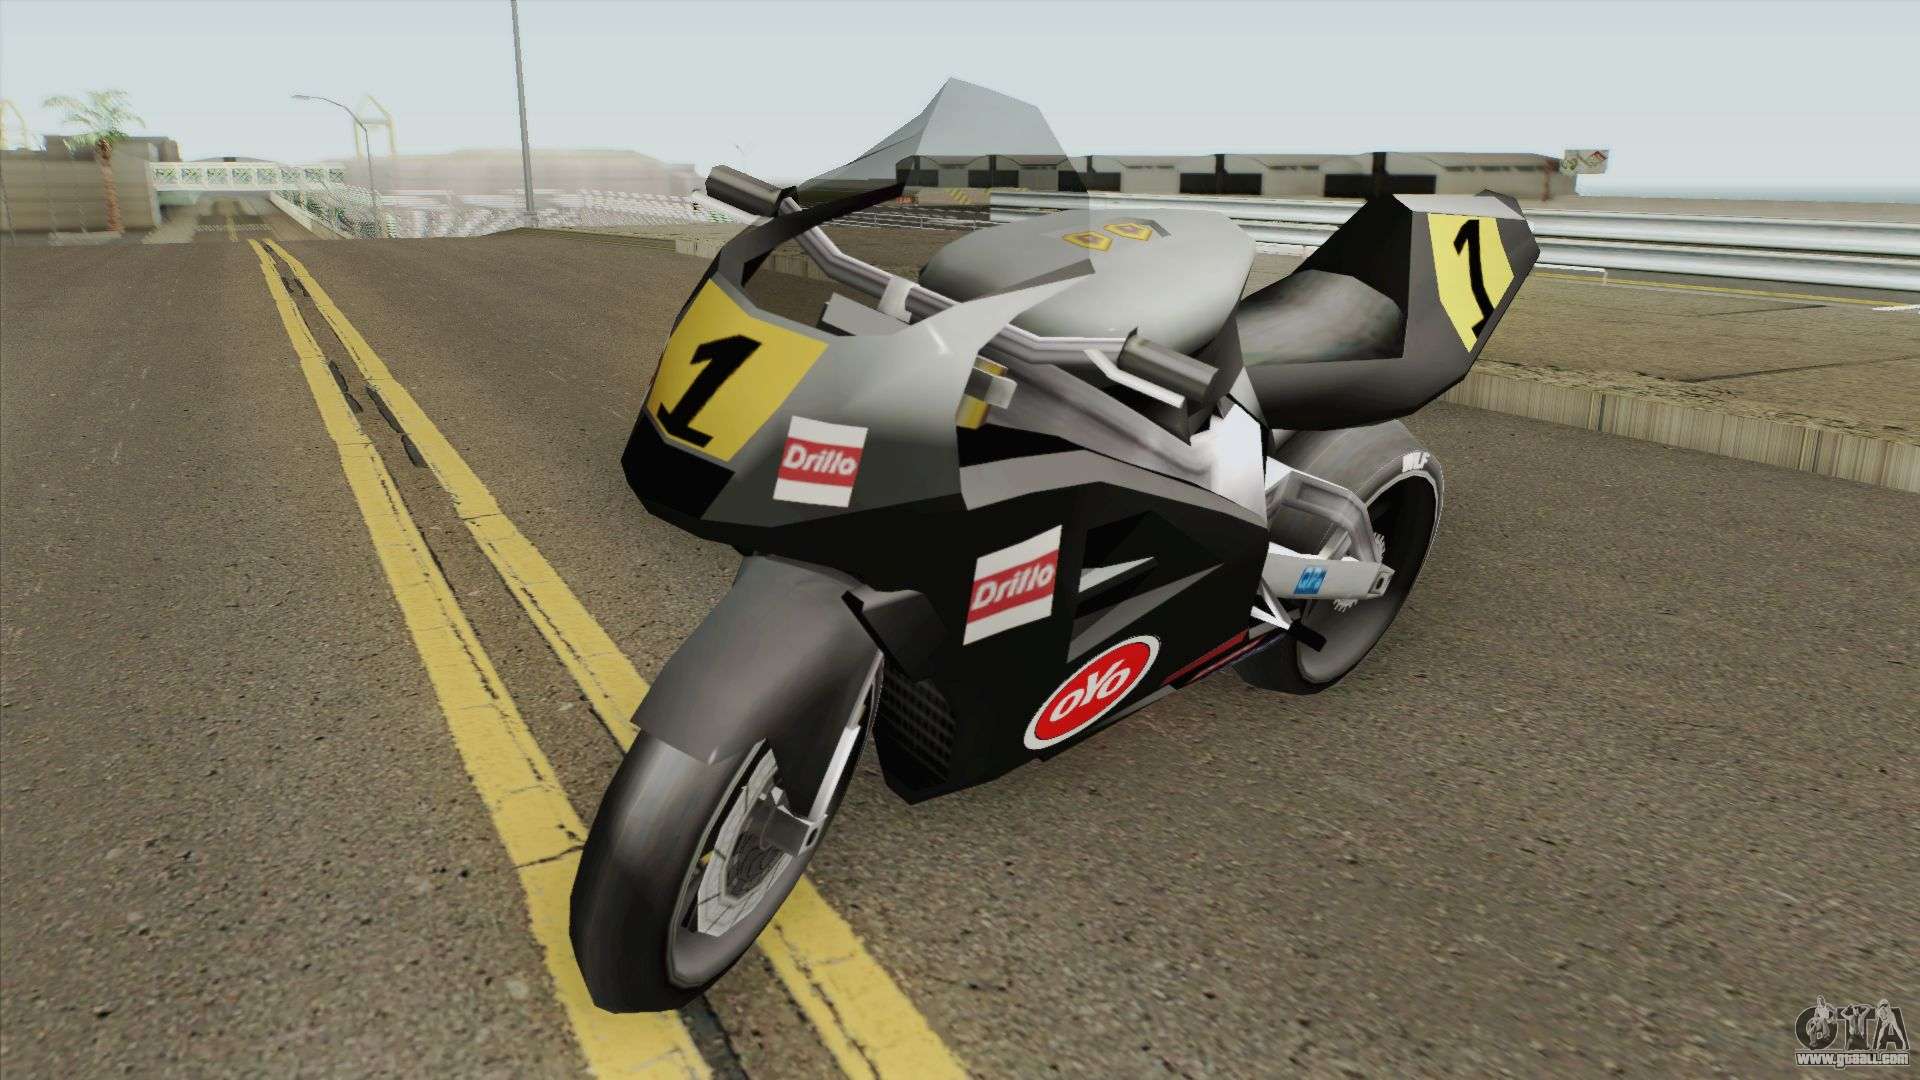 NRG-500 (Motorcycle), Grand Theft Auto San Andreas Wiki